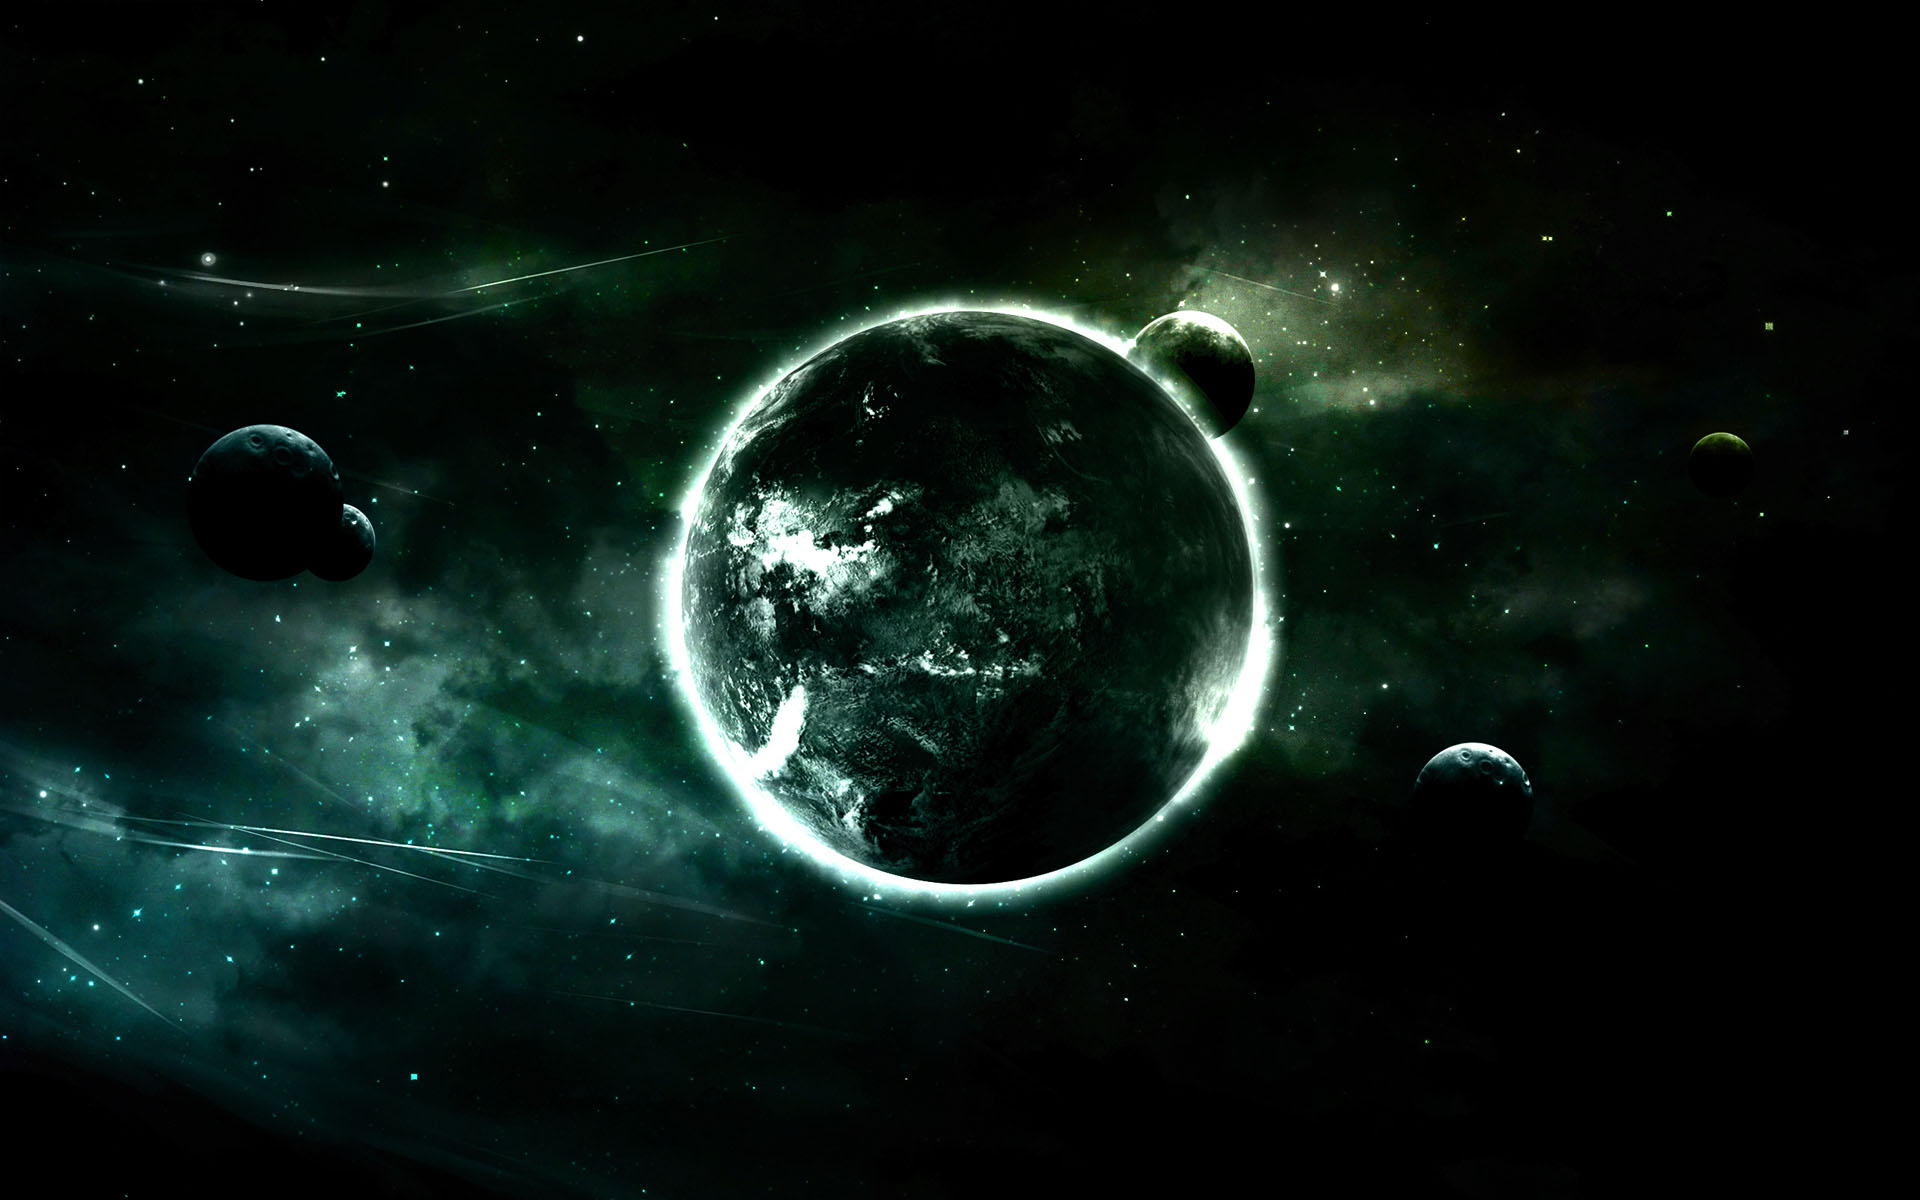 glowing live wallpaper,outer space,astronomical object,planet,universe,darkness